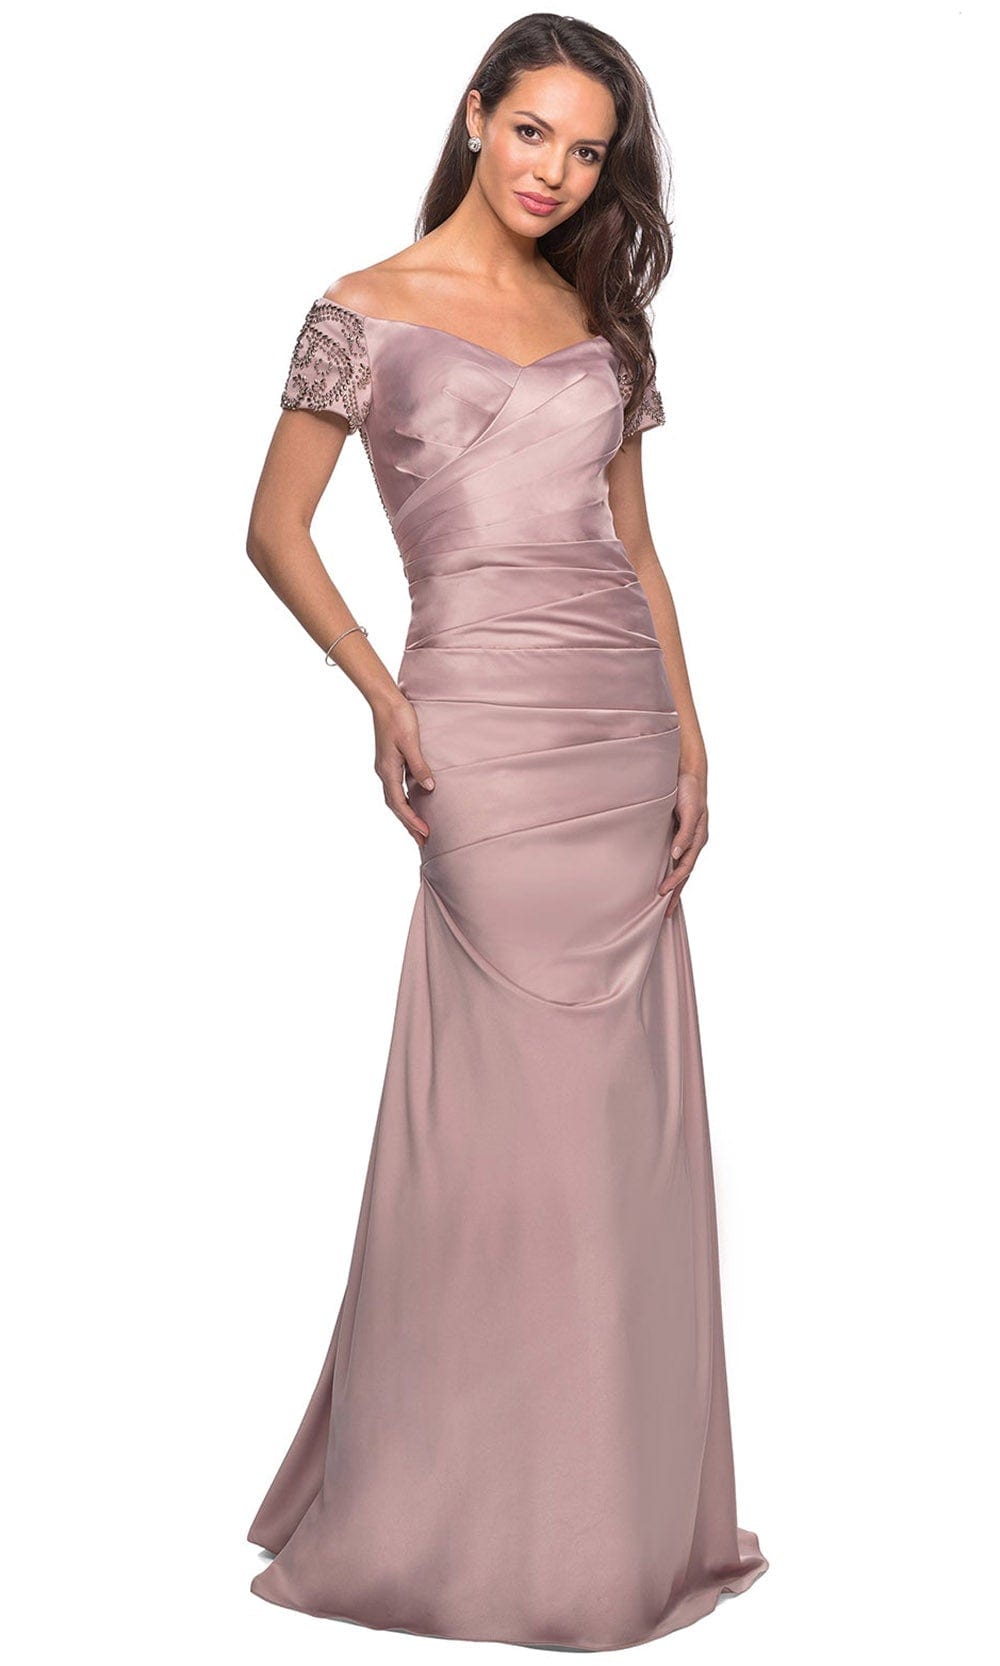 La Femme 25996 - Embellished Pleated Long Dress Special Occasion Dress 2 / Champagne